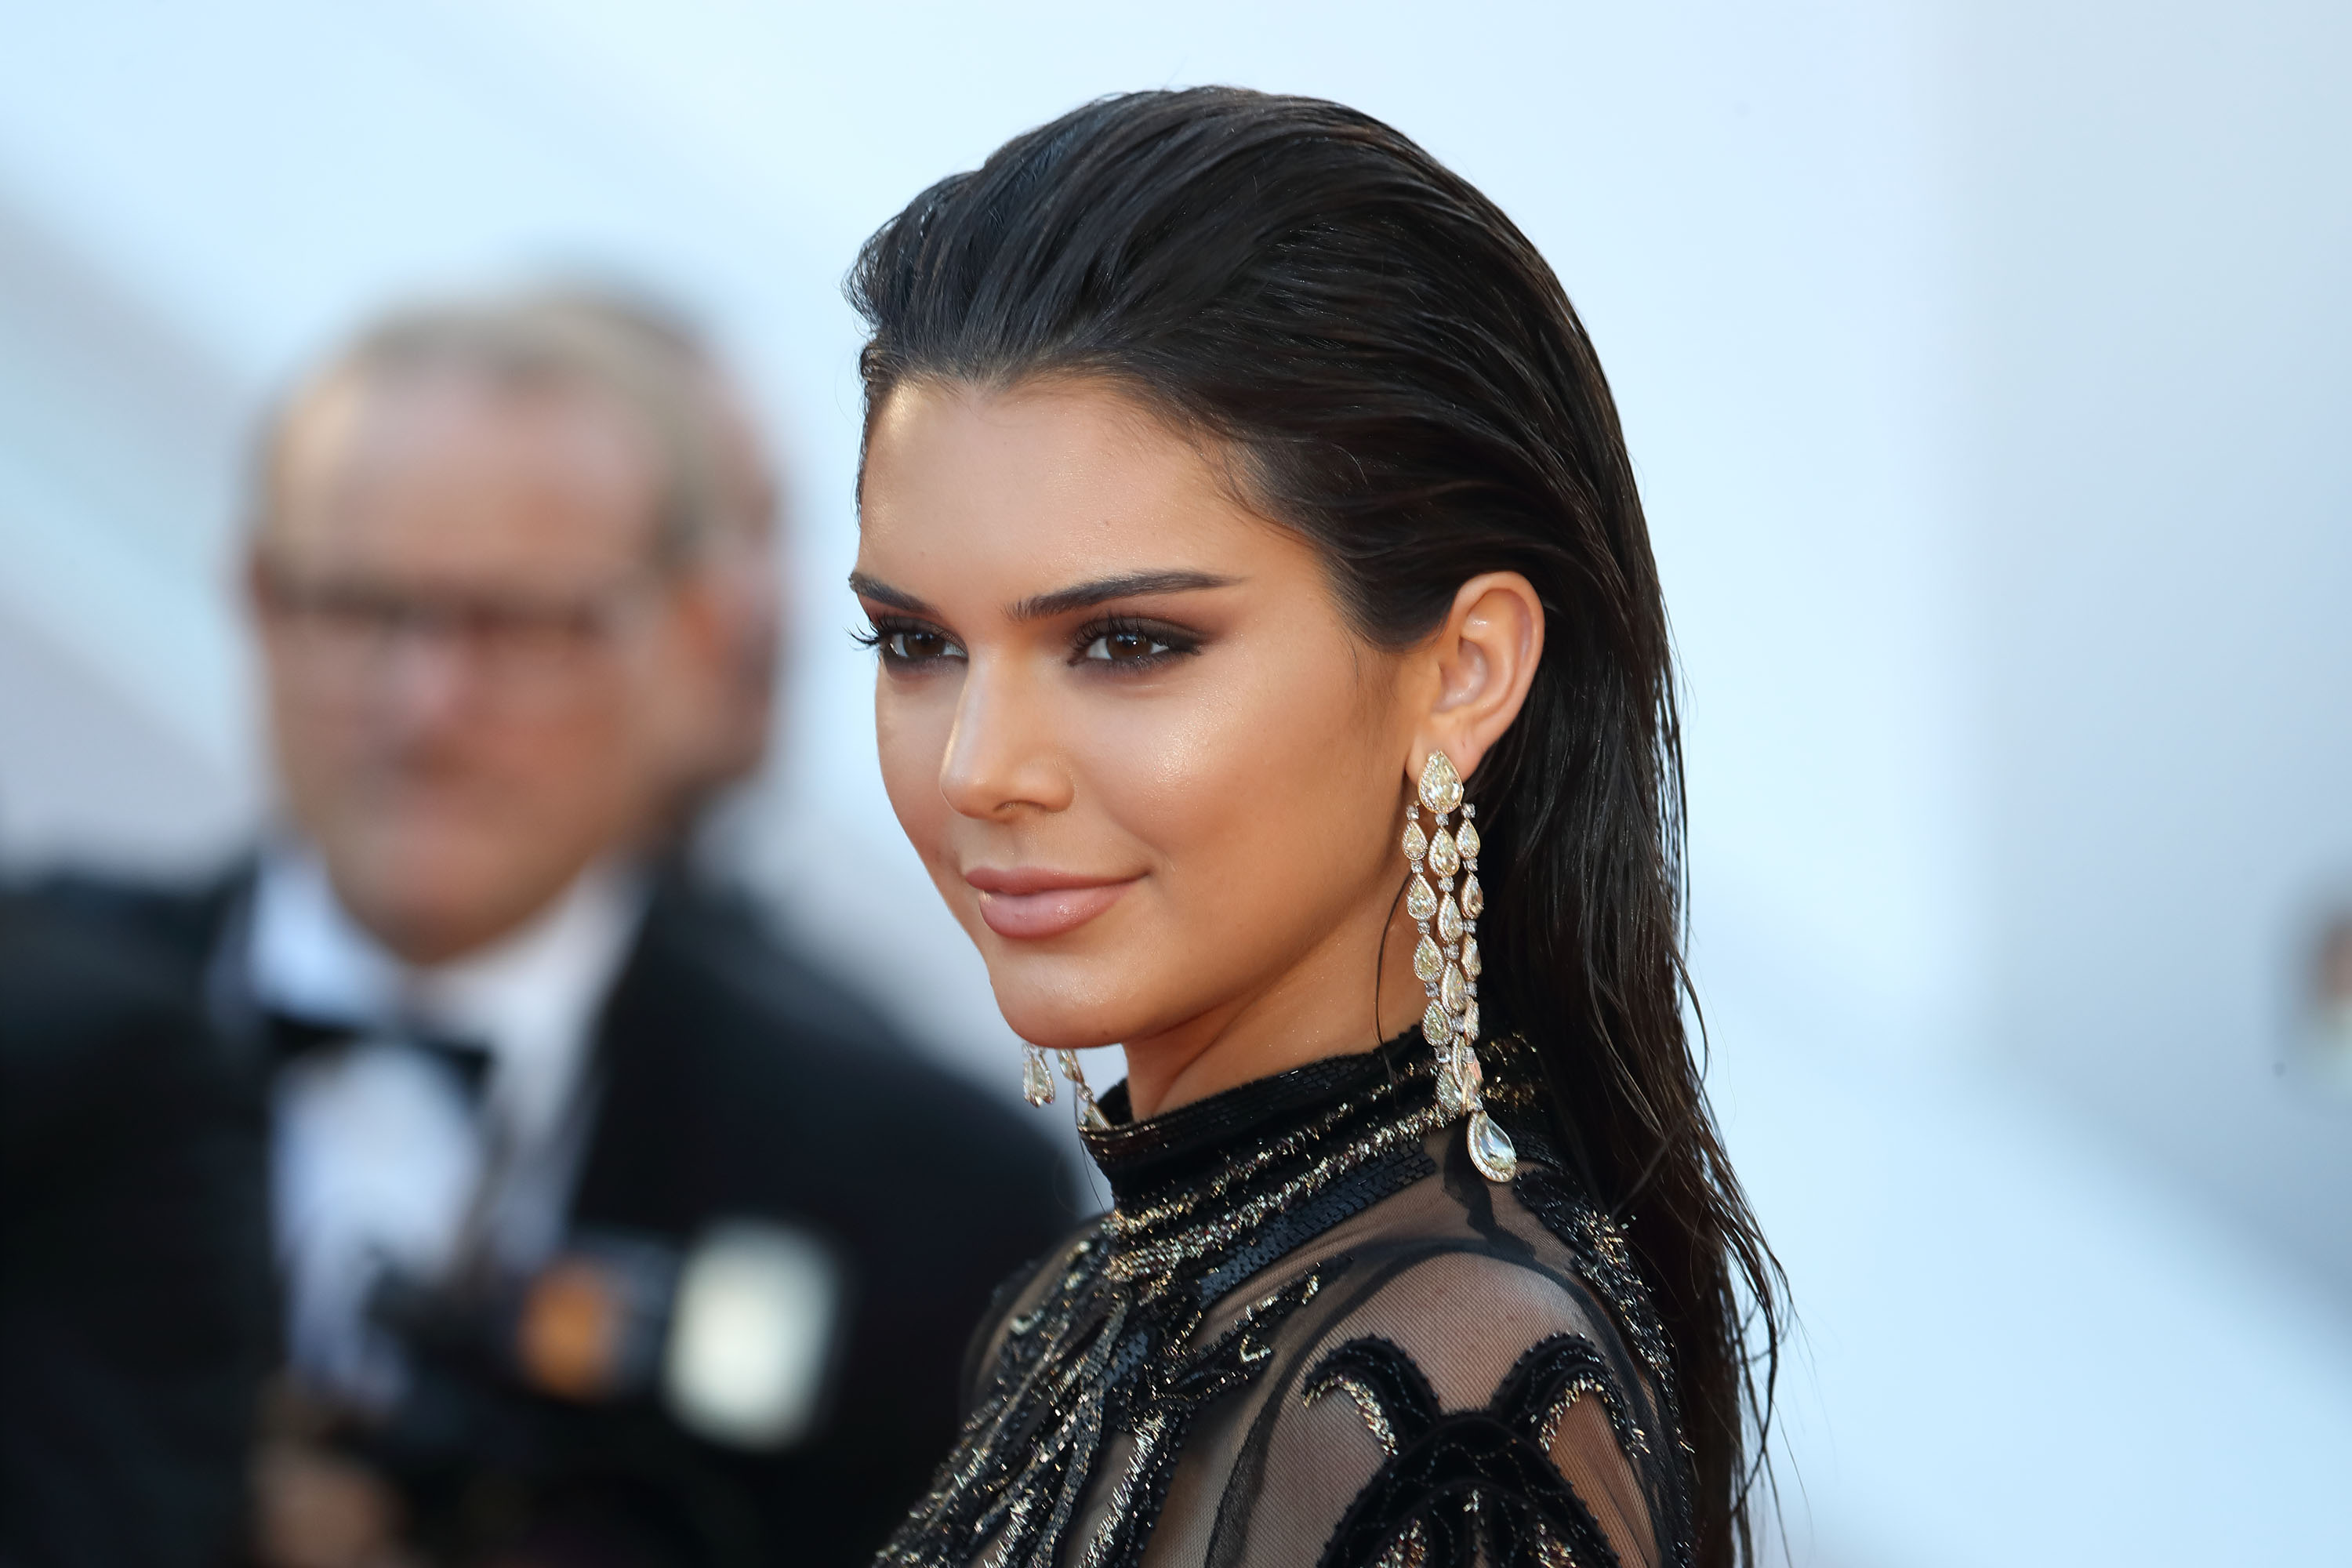 Kendall Jenner attends the "From The Land Of The Moon (Mal De Pierres)" premiere during the 69th annual Cannes Film Festival at the Palais des Festivals on May 15, 2016 in Cannes. (Mike Marsland—WireImage/Getty Images)